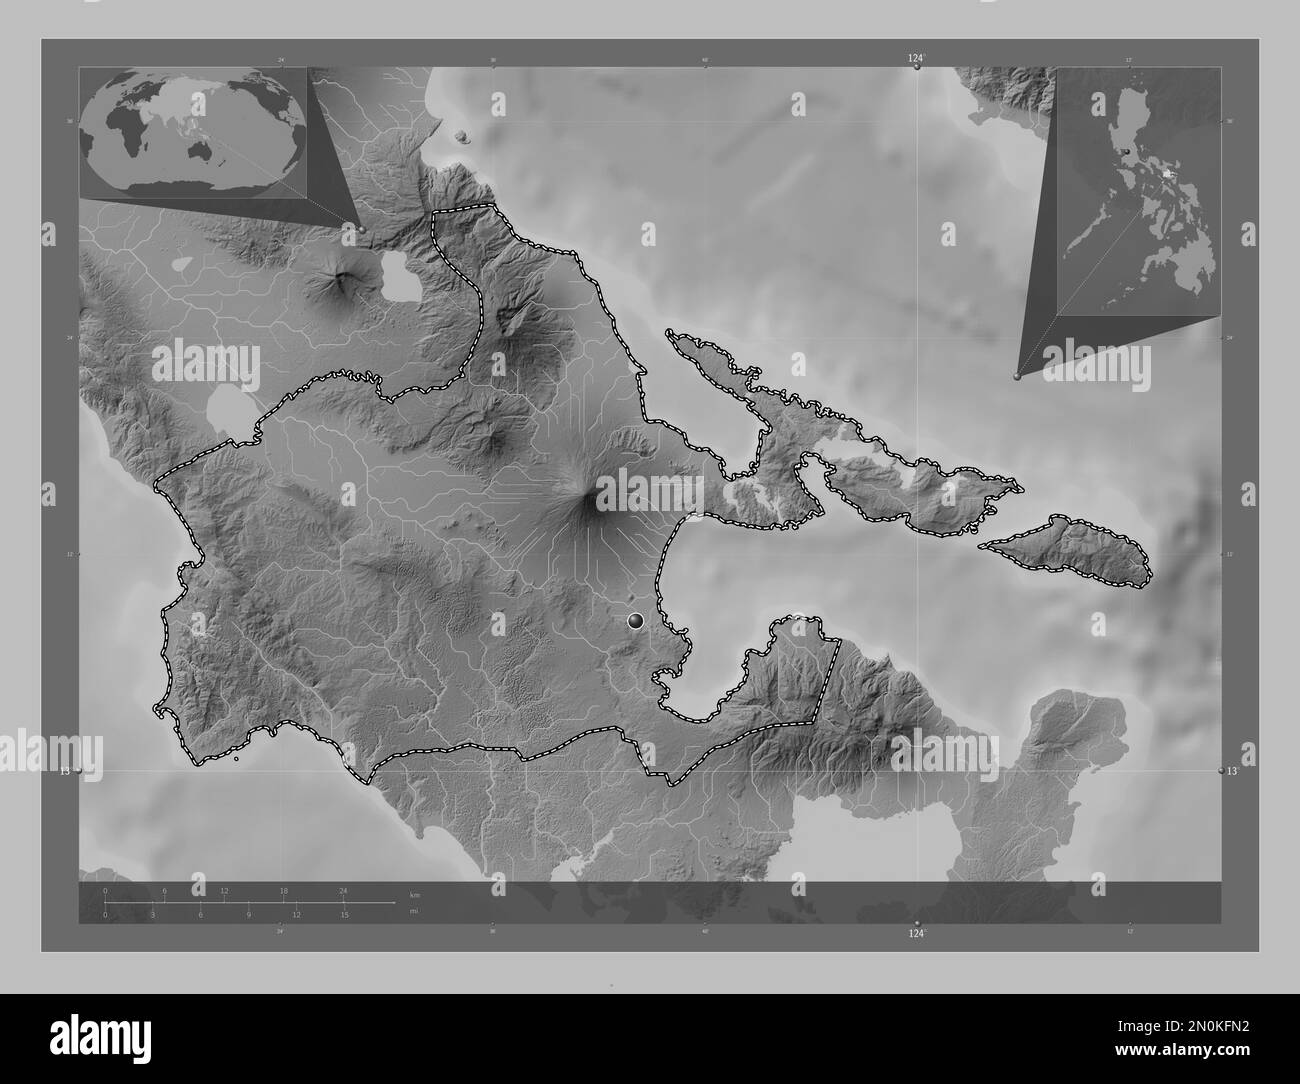 Albay, province of Philippines. Grayscale elevation map with lakes and rivers. Corner auxiliary location maps Stock Photo